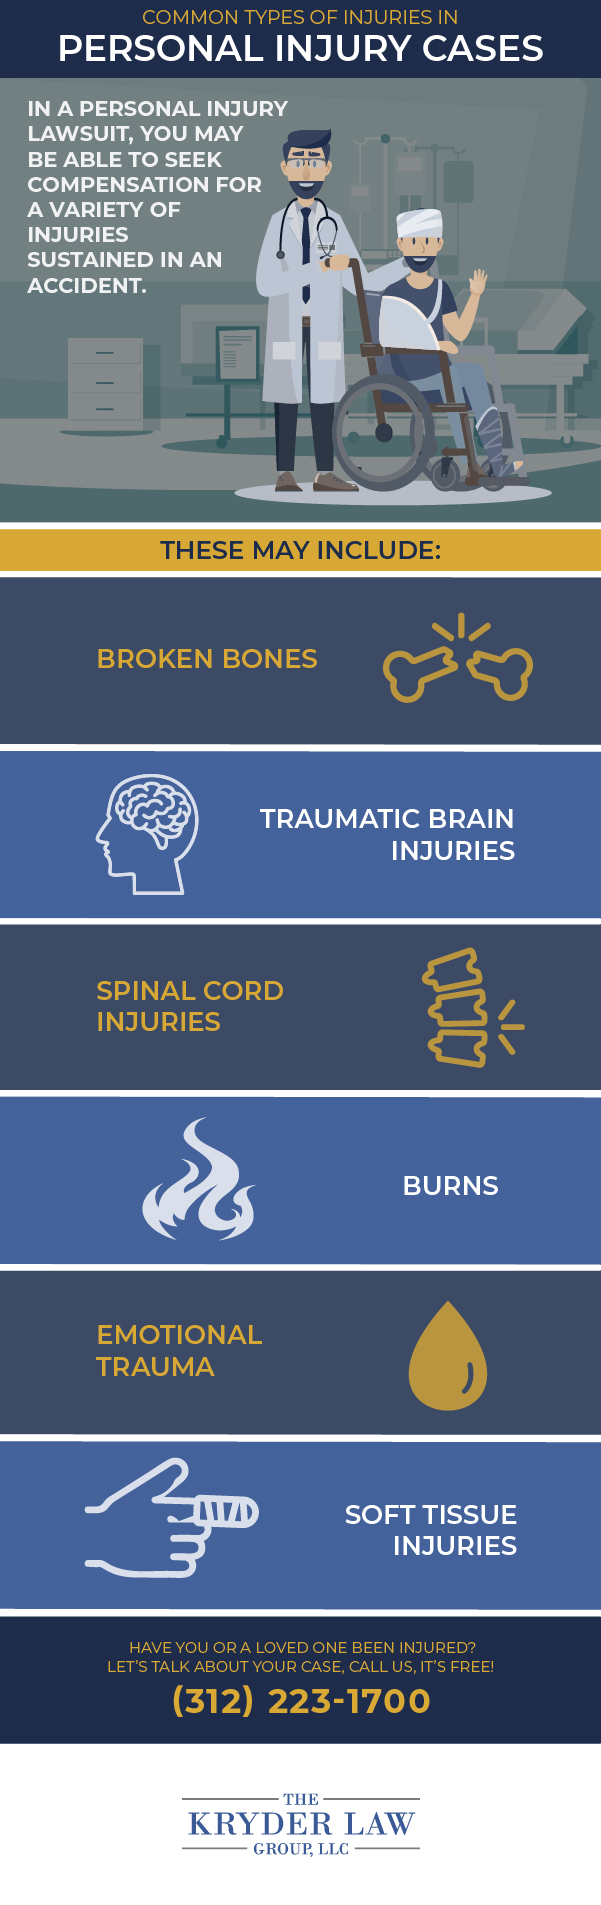 Common Types of Personal Injury Cases in the USA